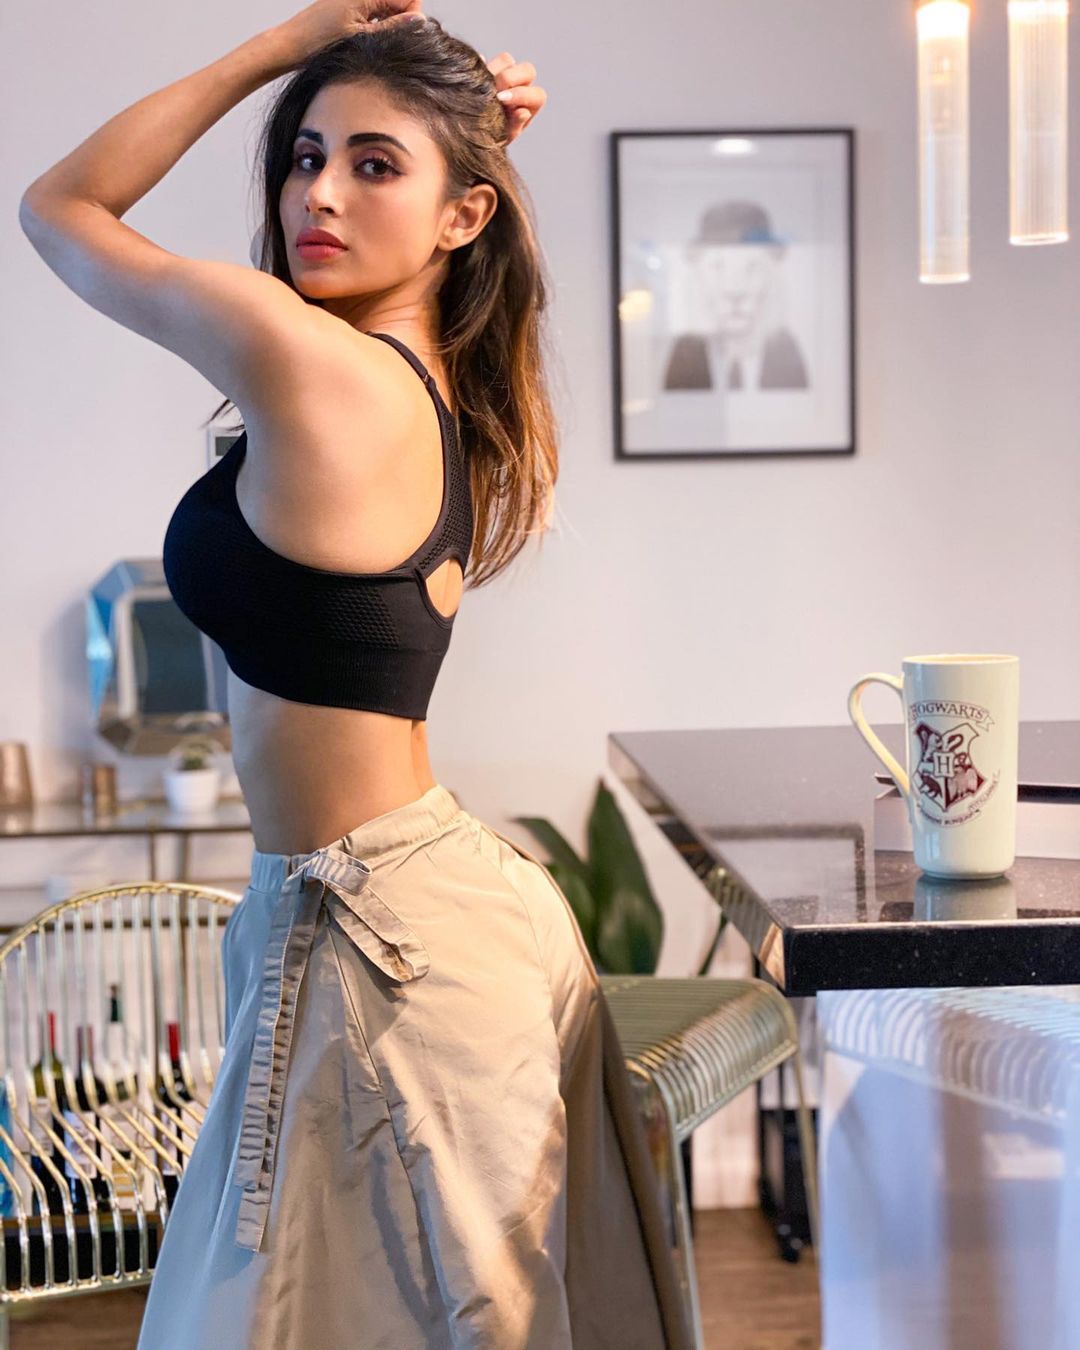 17. 6. Mouni Roy flaunts her sexy curves as she poses in a black sports bra...